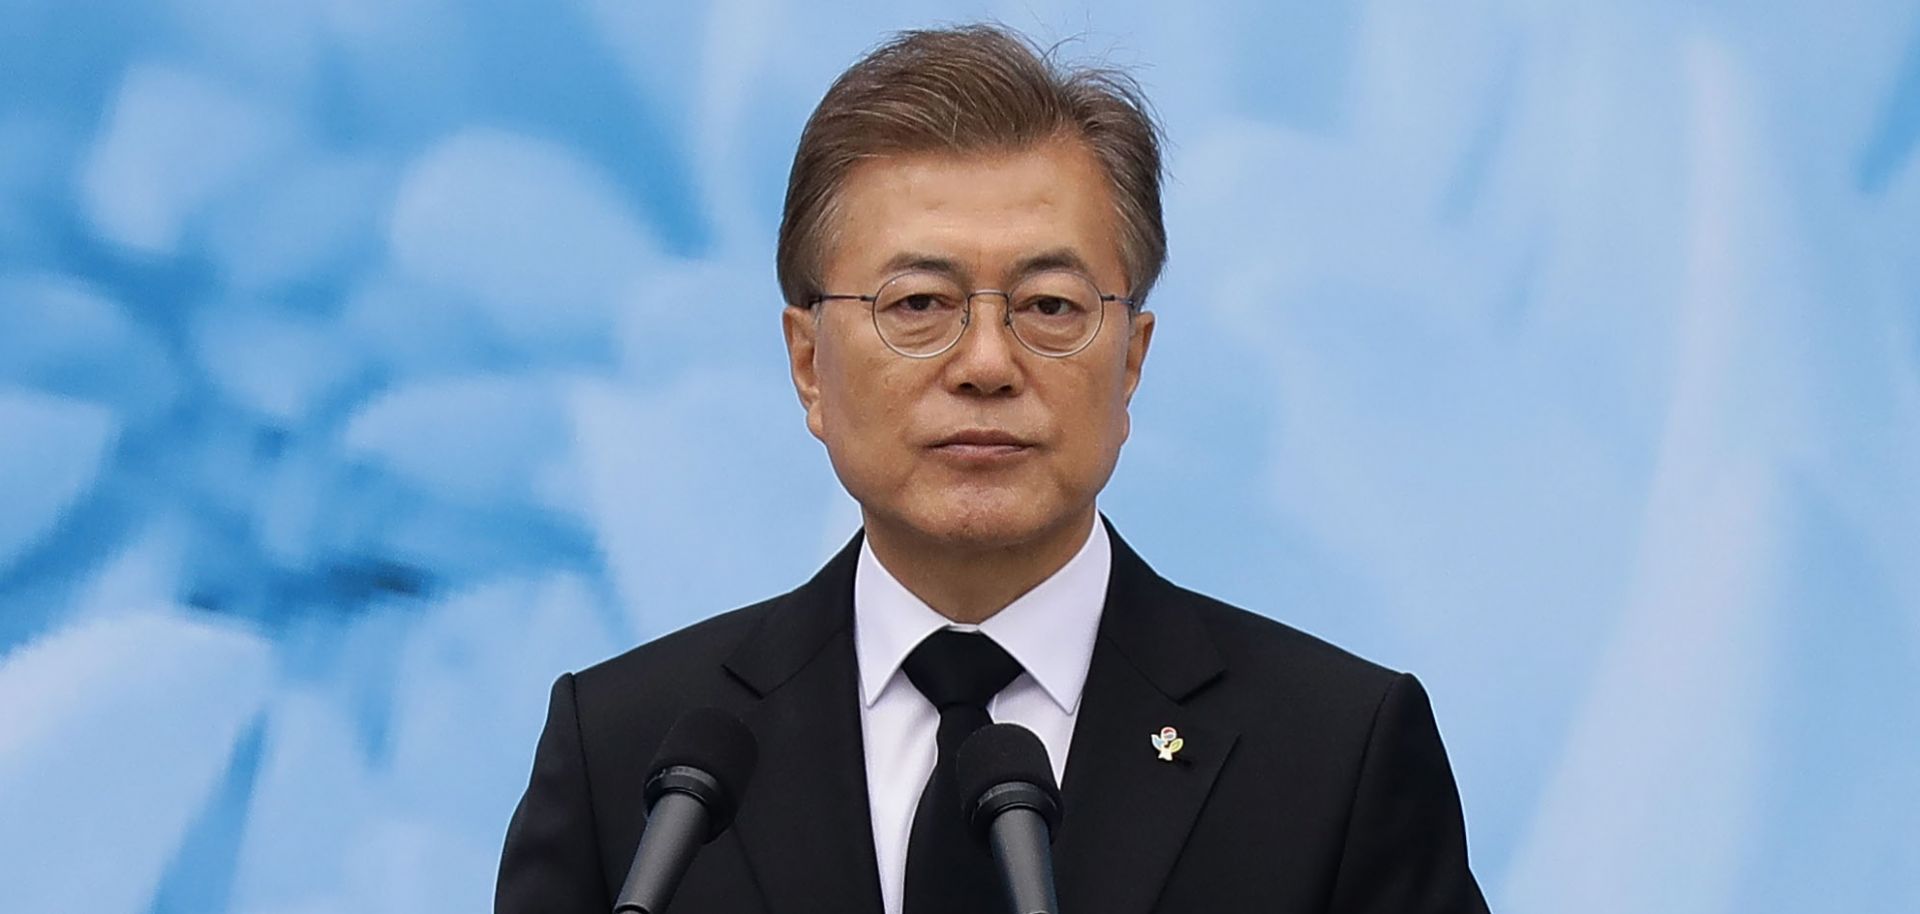 South Korean President Moon Jae In is meeting with U.S. President Donald Trump on June 29 and 30 in Washington.